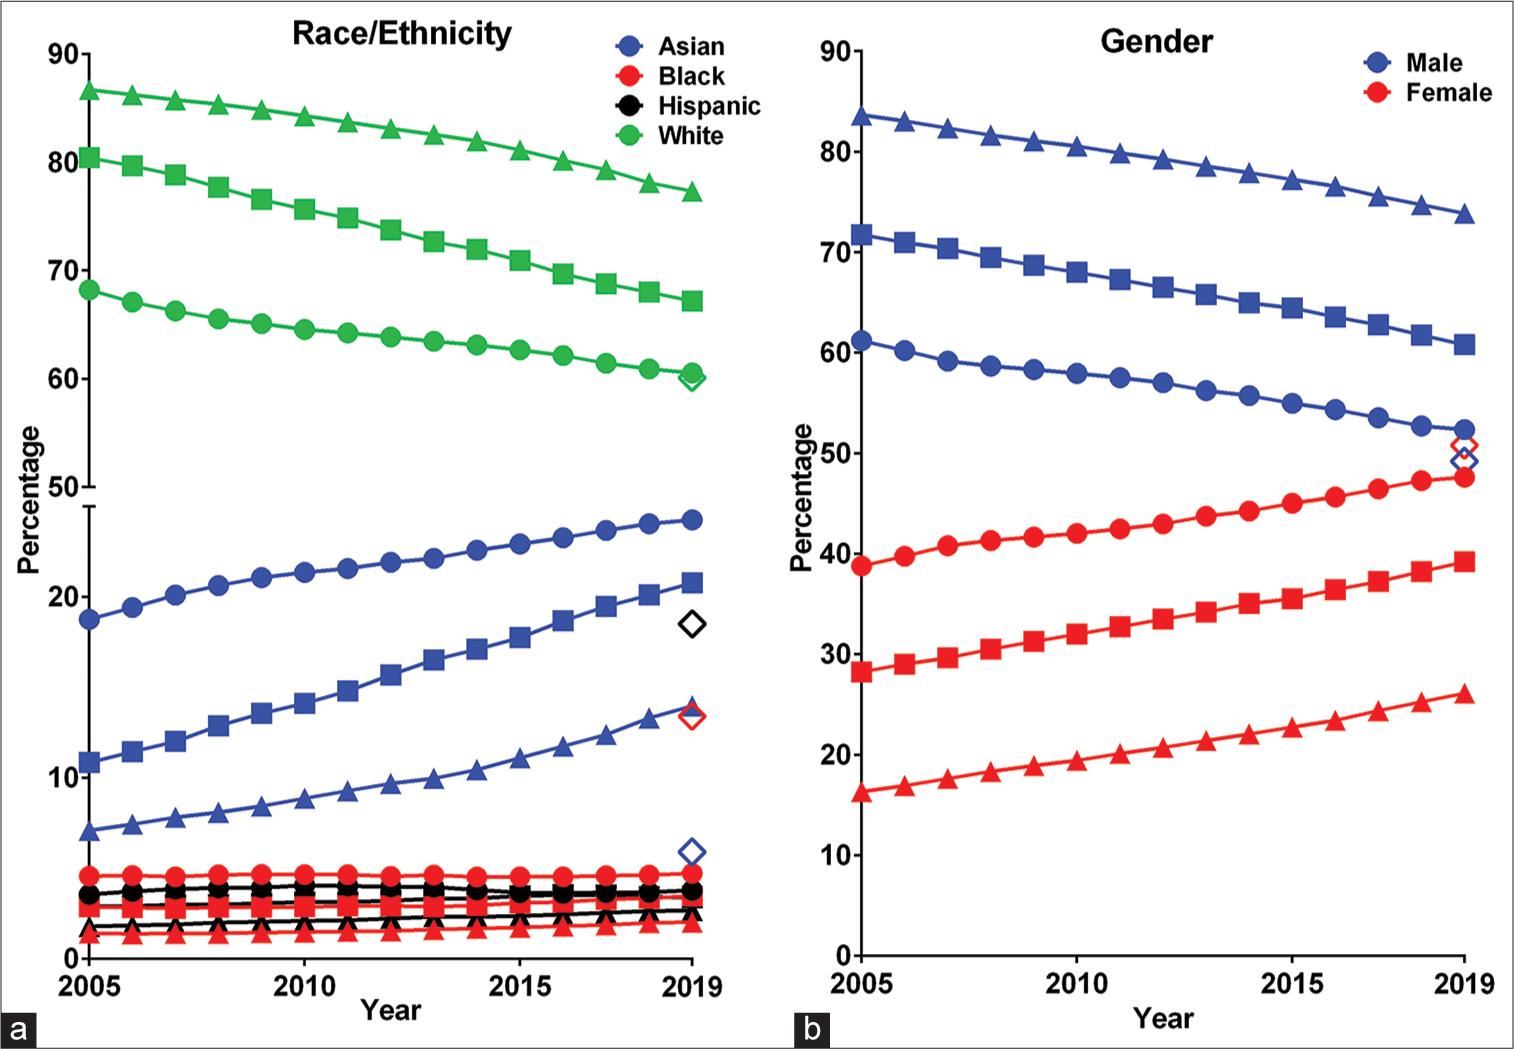 Proportions of Full Professorships, Associate Professorships, and Assistant Professorships by year for (a) the four largest races/ ethnicities and (b) gender. Closed symbols indicate academic rank (Circle: Assistant Professor, Square: Associate Professor, Triangle: Full Professor), while colors indicate race/ethnicity or gender. Open diamonds represent corresponding 2019 U.S. Census data.